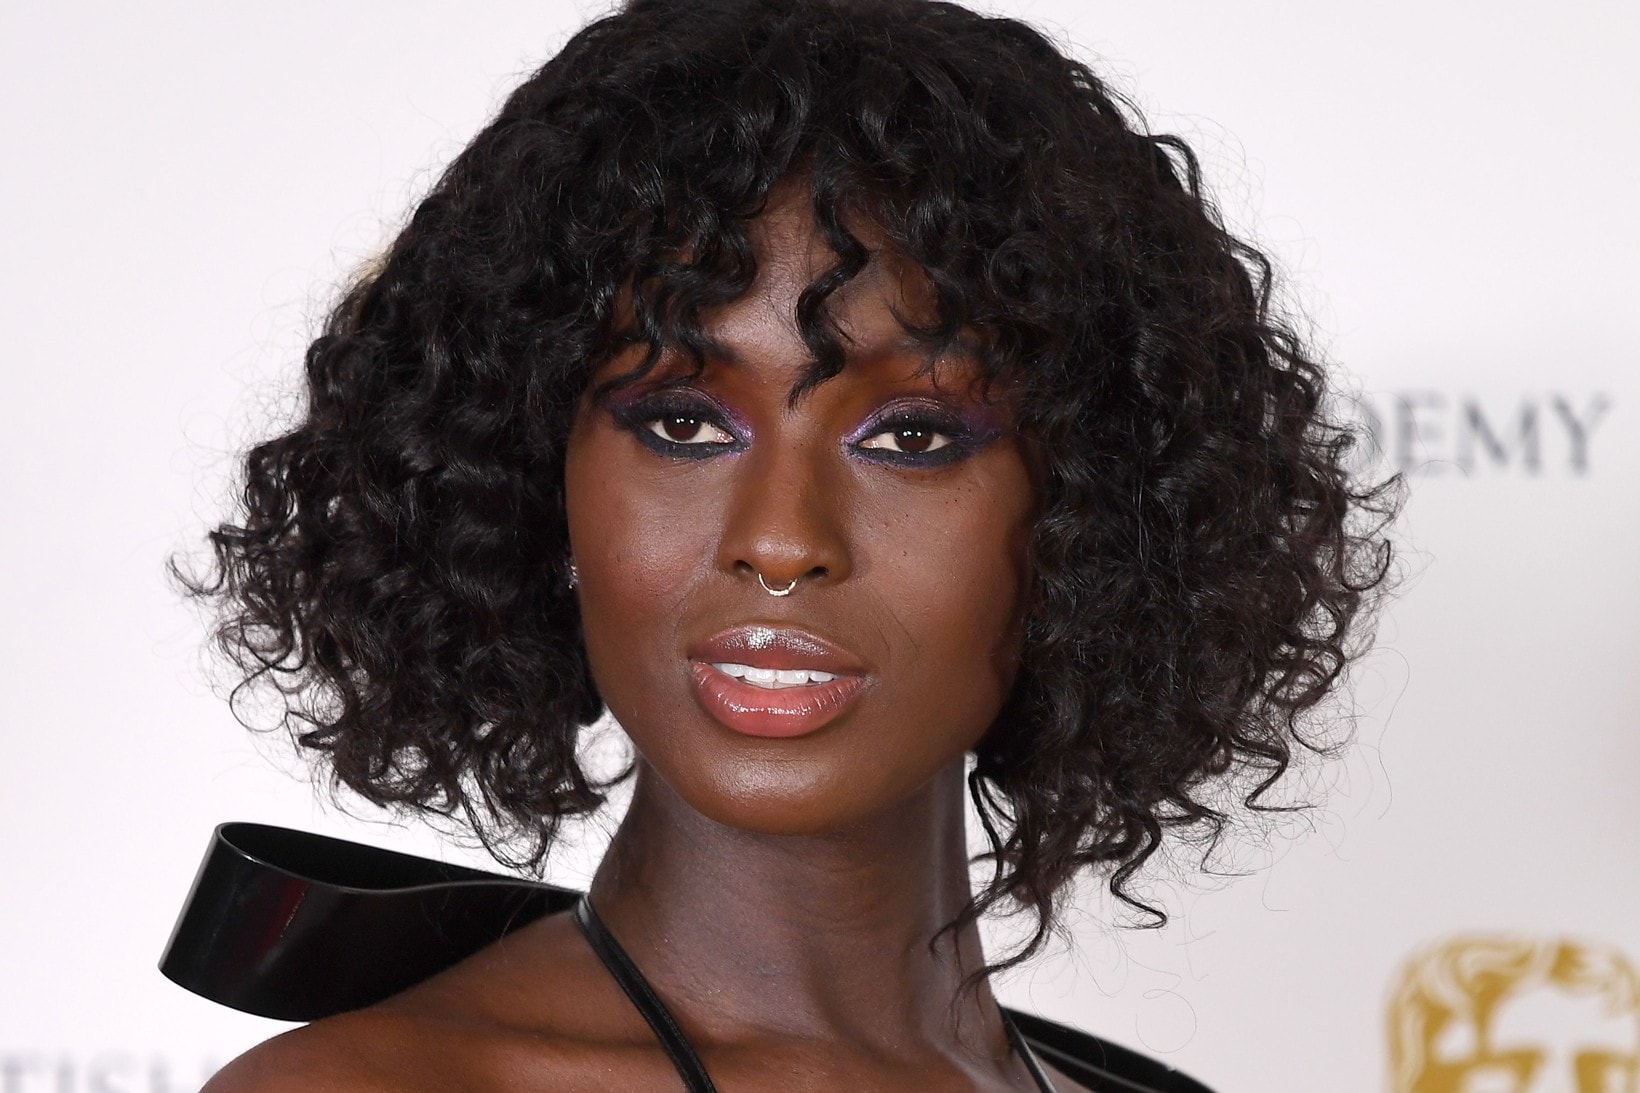 jodie turner smith jewelry theft cannes film festival hotel police report info 